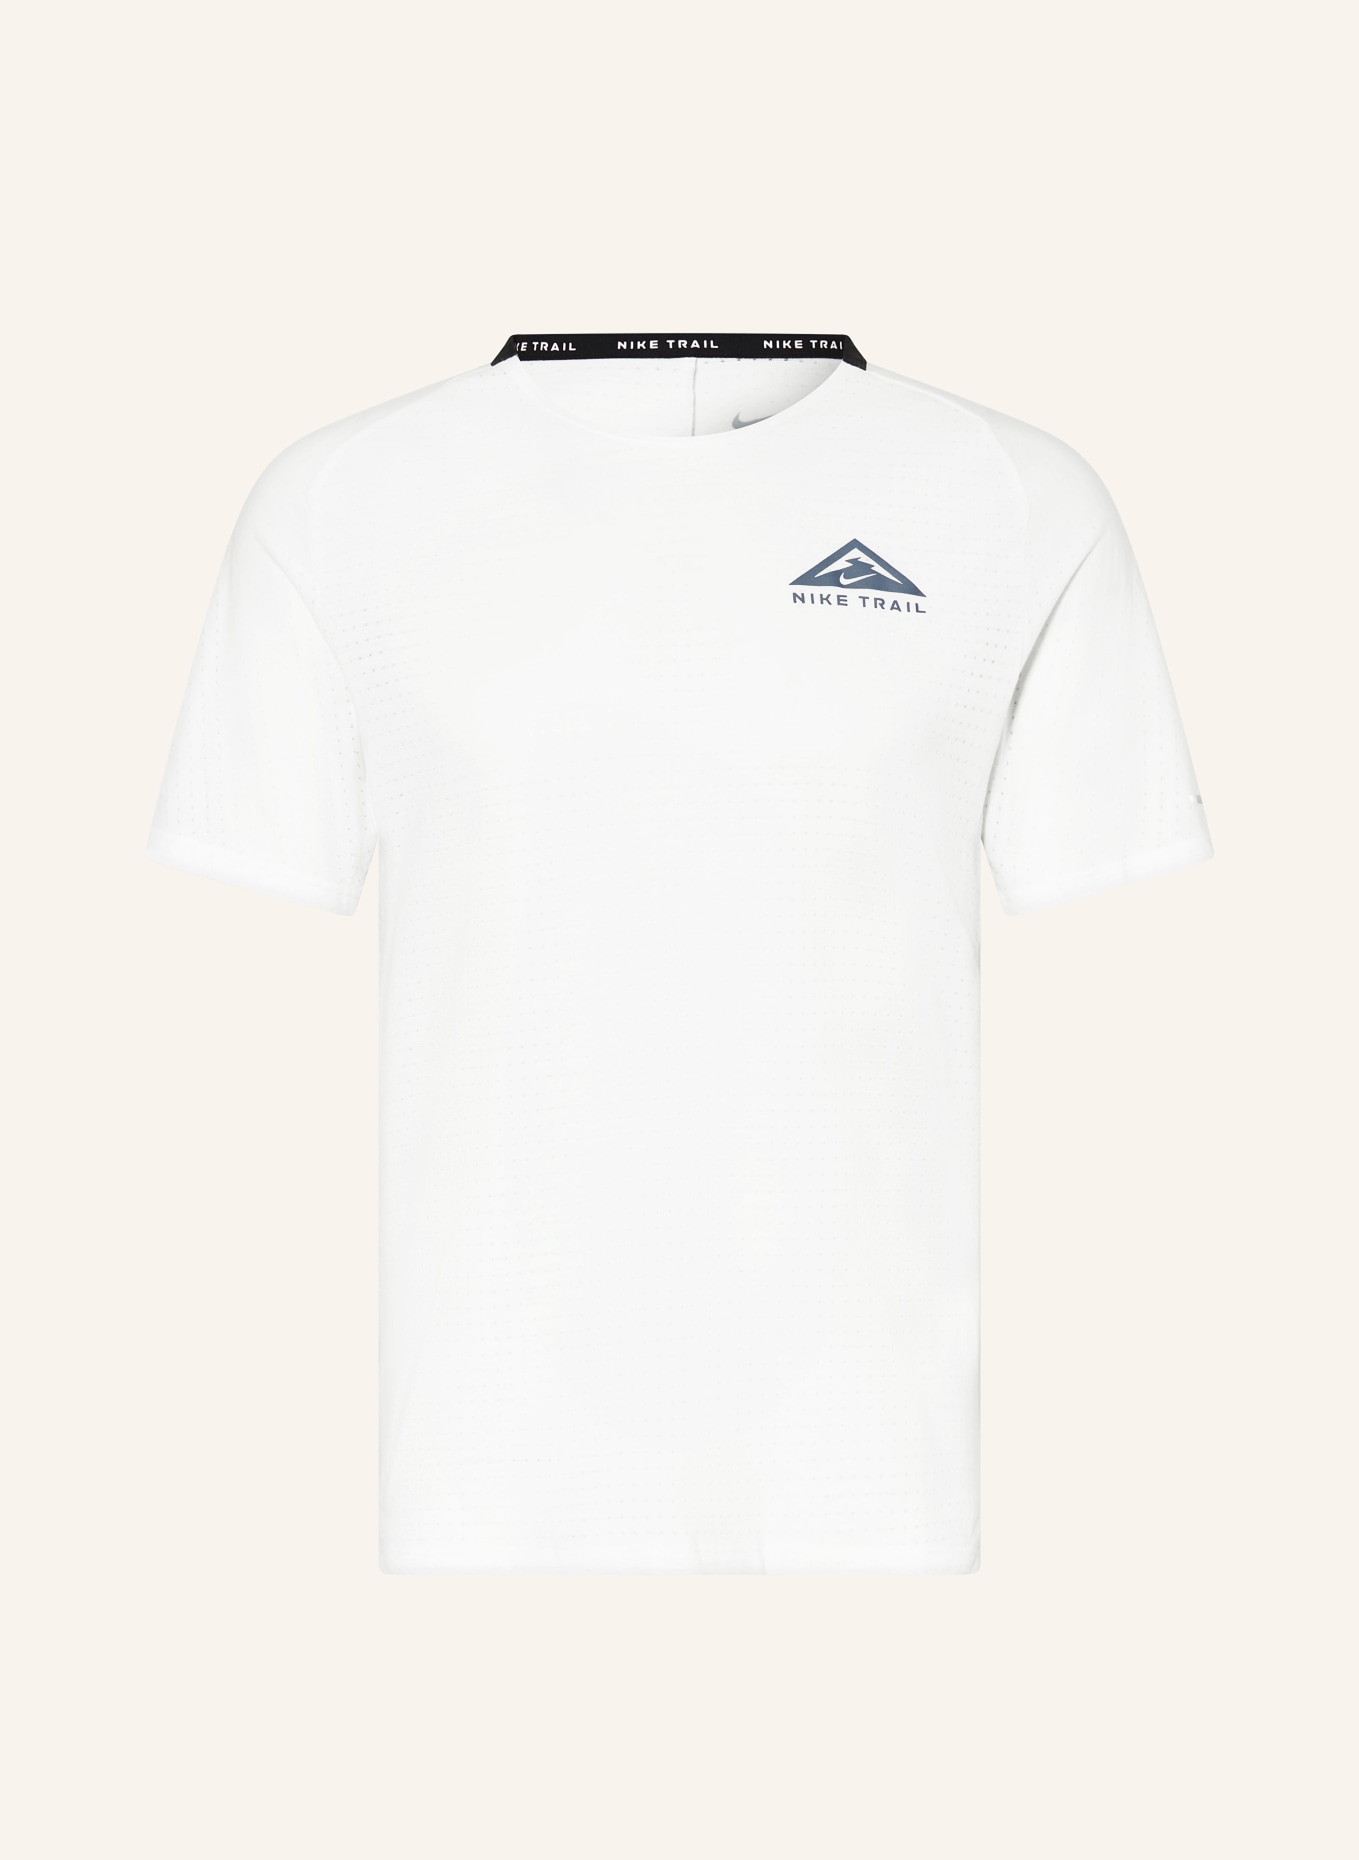 Nike Running shirt TRAIL SOLAR CHASE, Color: WHITE (Image 1)